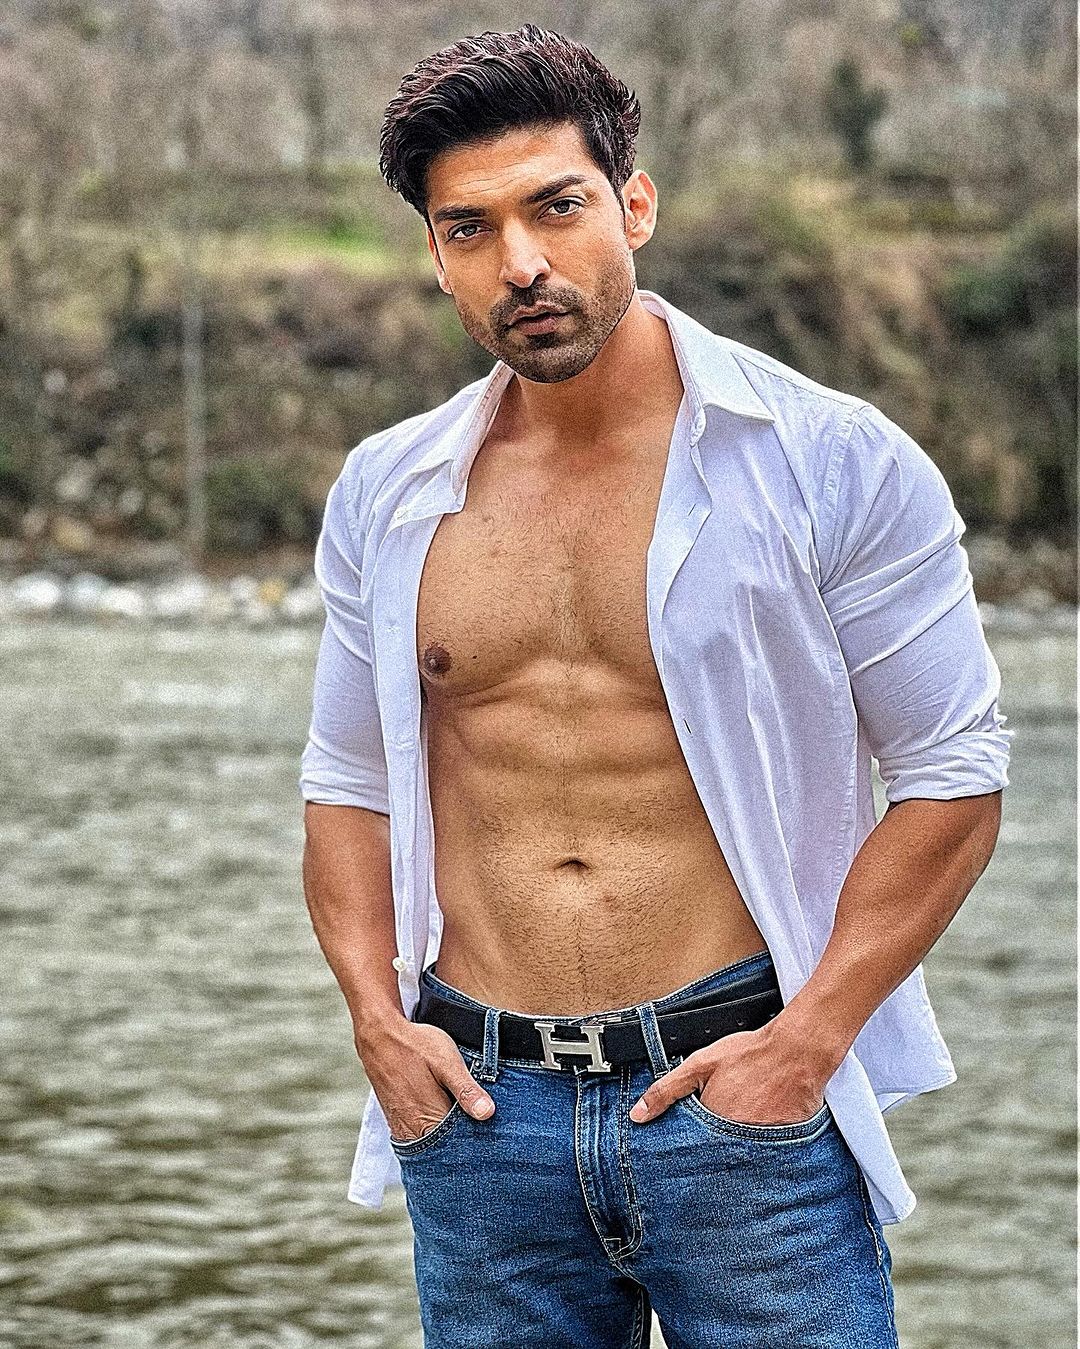 Gurmeet Choudhary ‘s Fans On Top Of The World For The Latest Big Announcement By Him. Find Out What He Surprisingly Revealed! 